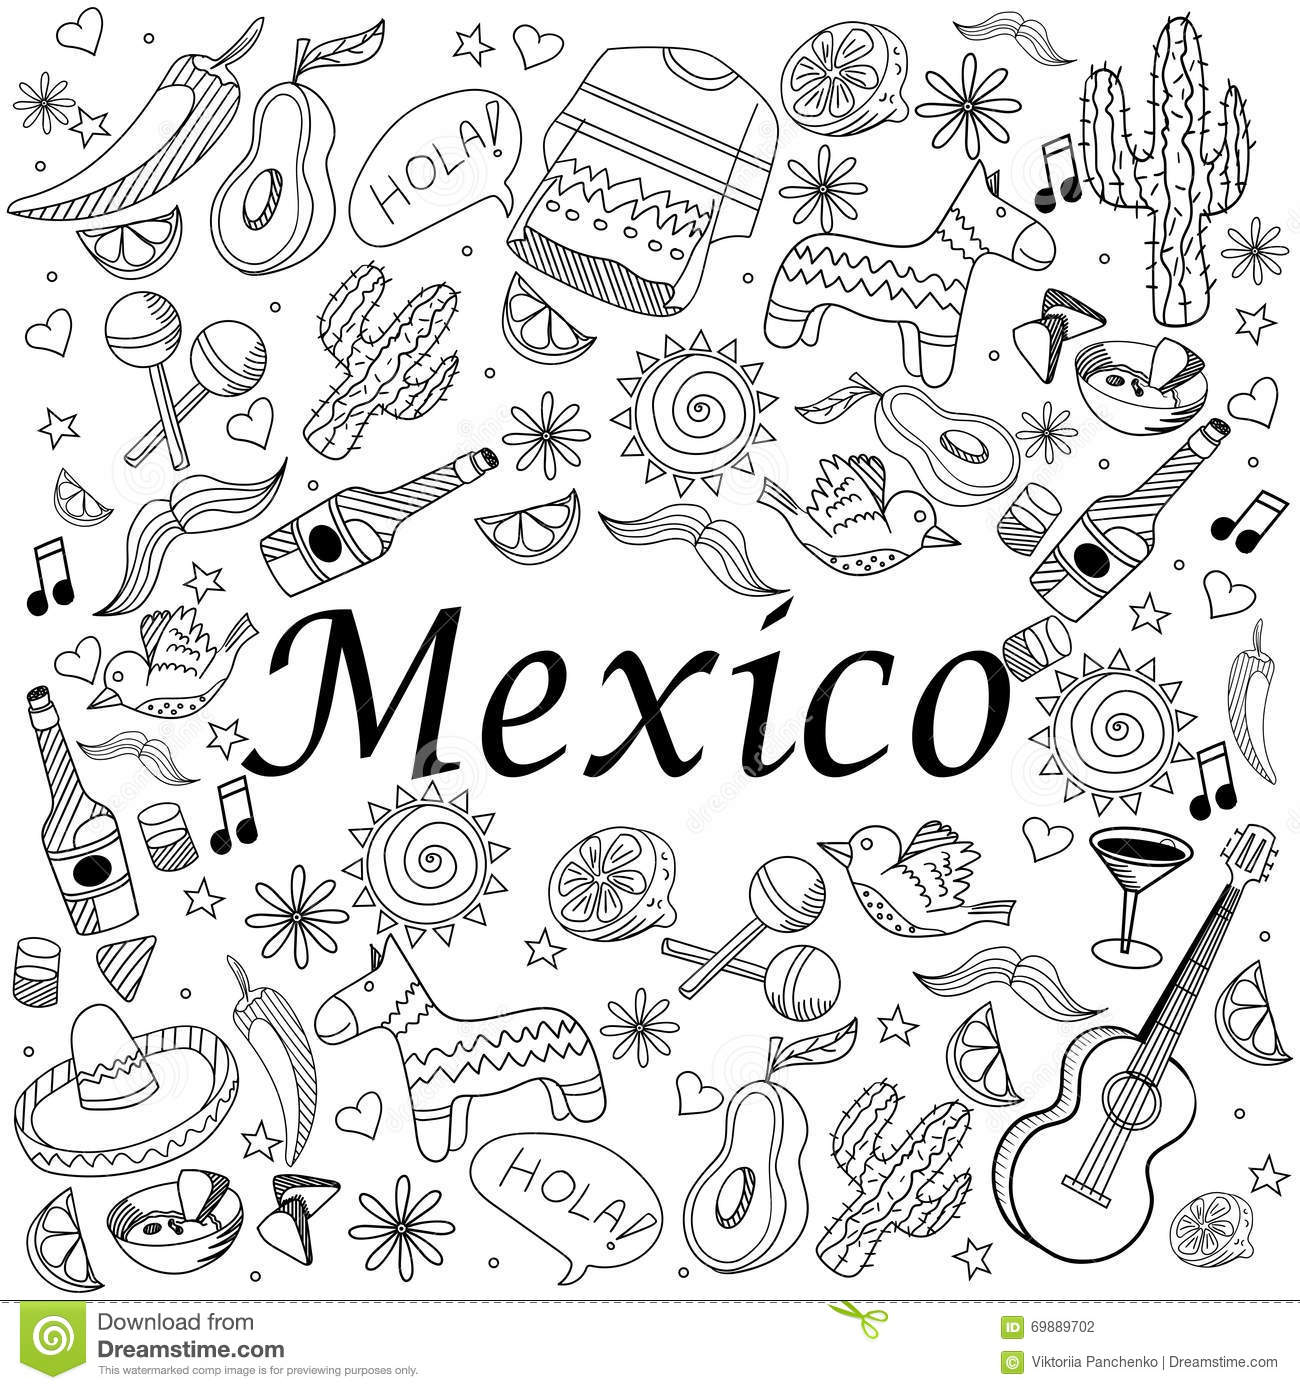 Mexico coloring #12, Download drawings